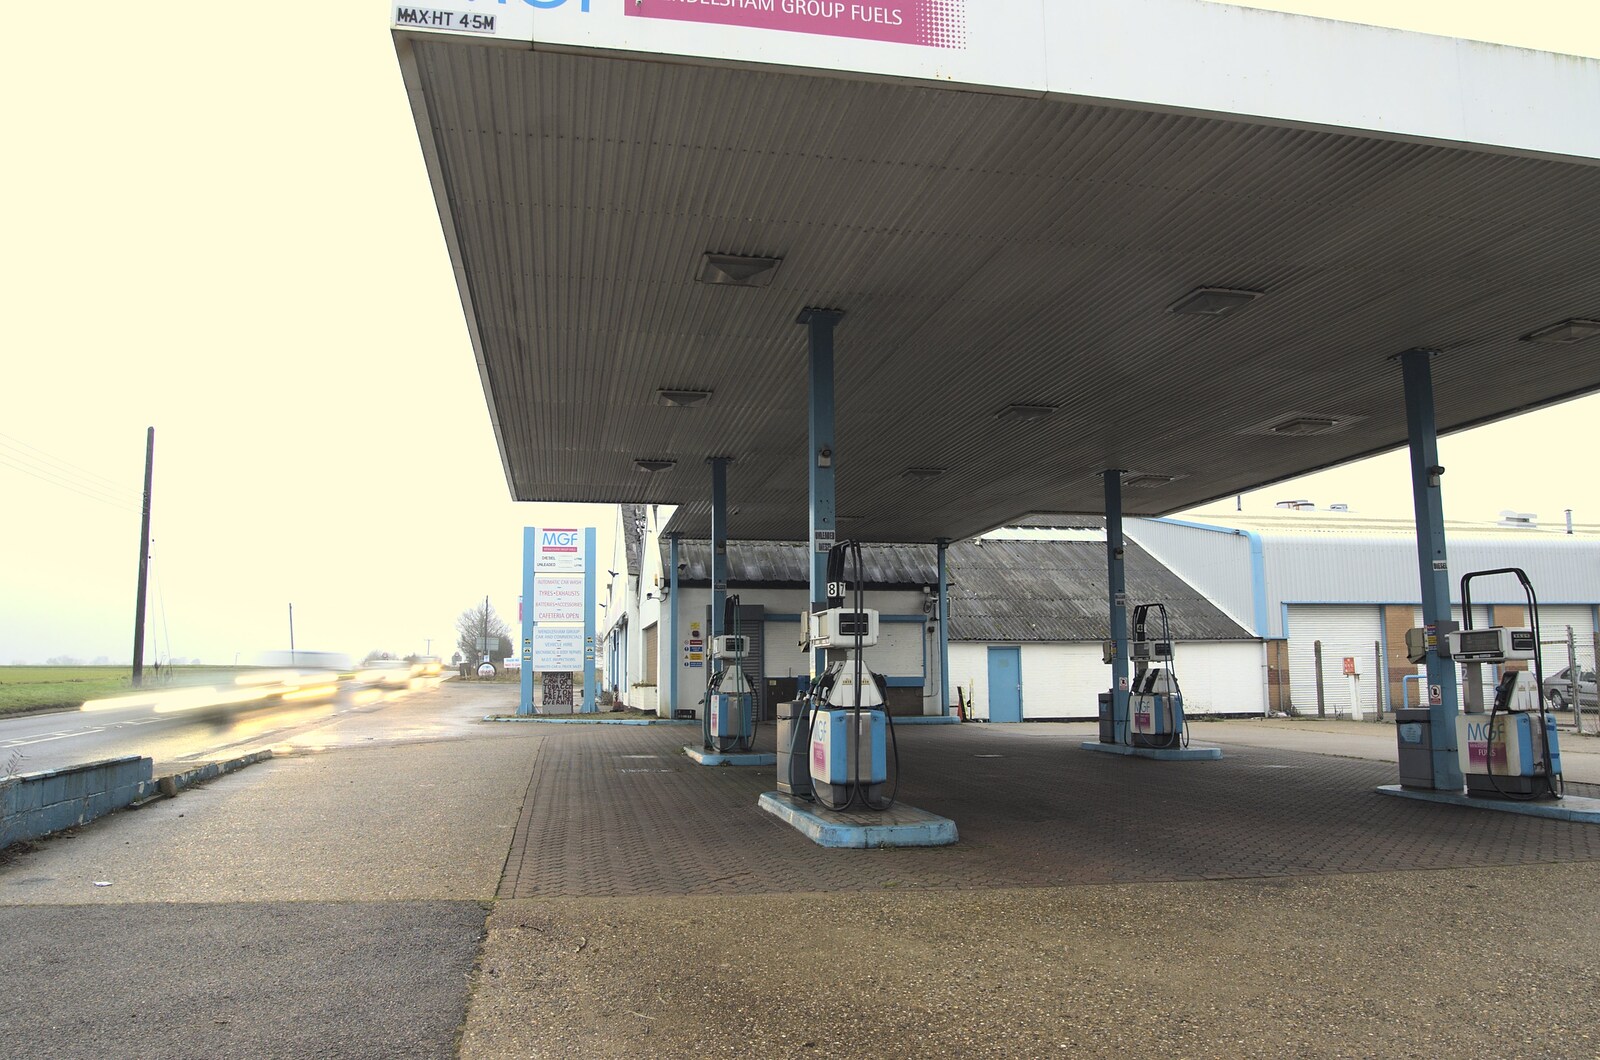 The forecourt of Mendlesham Group Fuels from A Derelict Petrol Station, Brockford Street, Suffolk - 7th February 2010